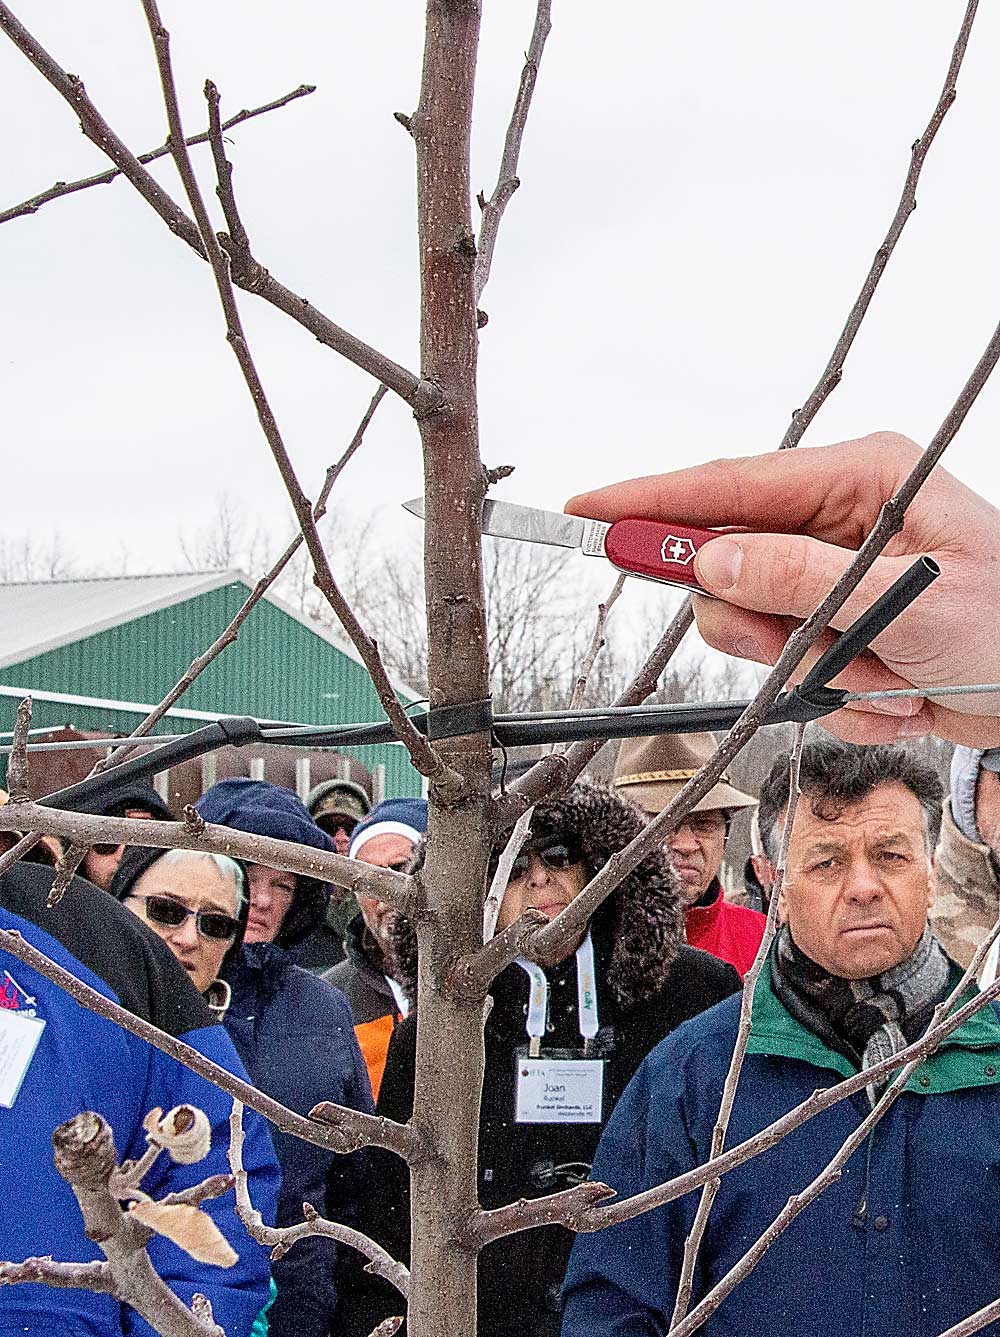 Dan Dietrich of Ridgeview Orchards explains his farm’s grafting method, which he calls “side grafting.” They attach the grafted limbs below existing limbs, to prevent the grafts from getting flooded with moisture. (Matt Milkovich/Good Fruit Grower)